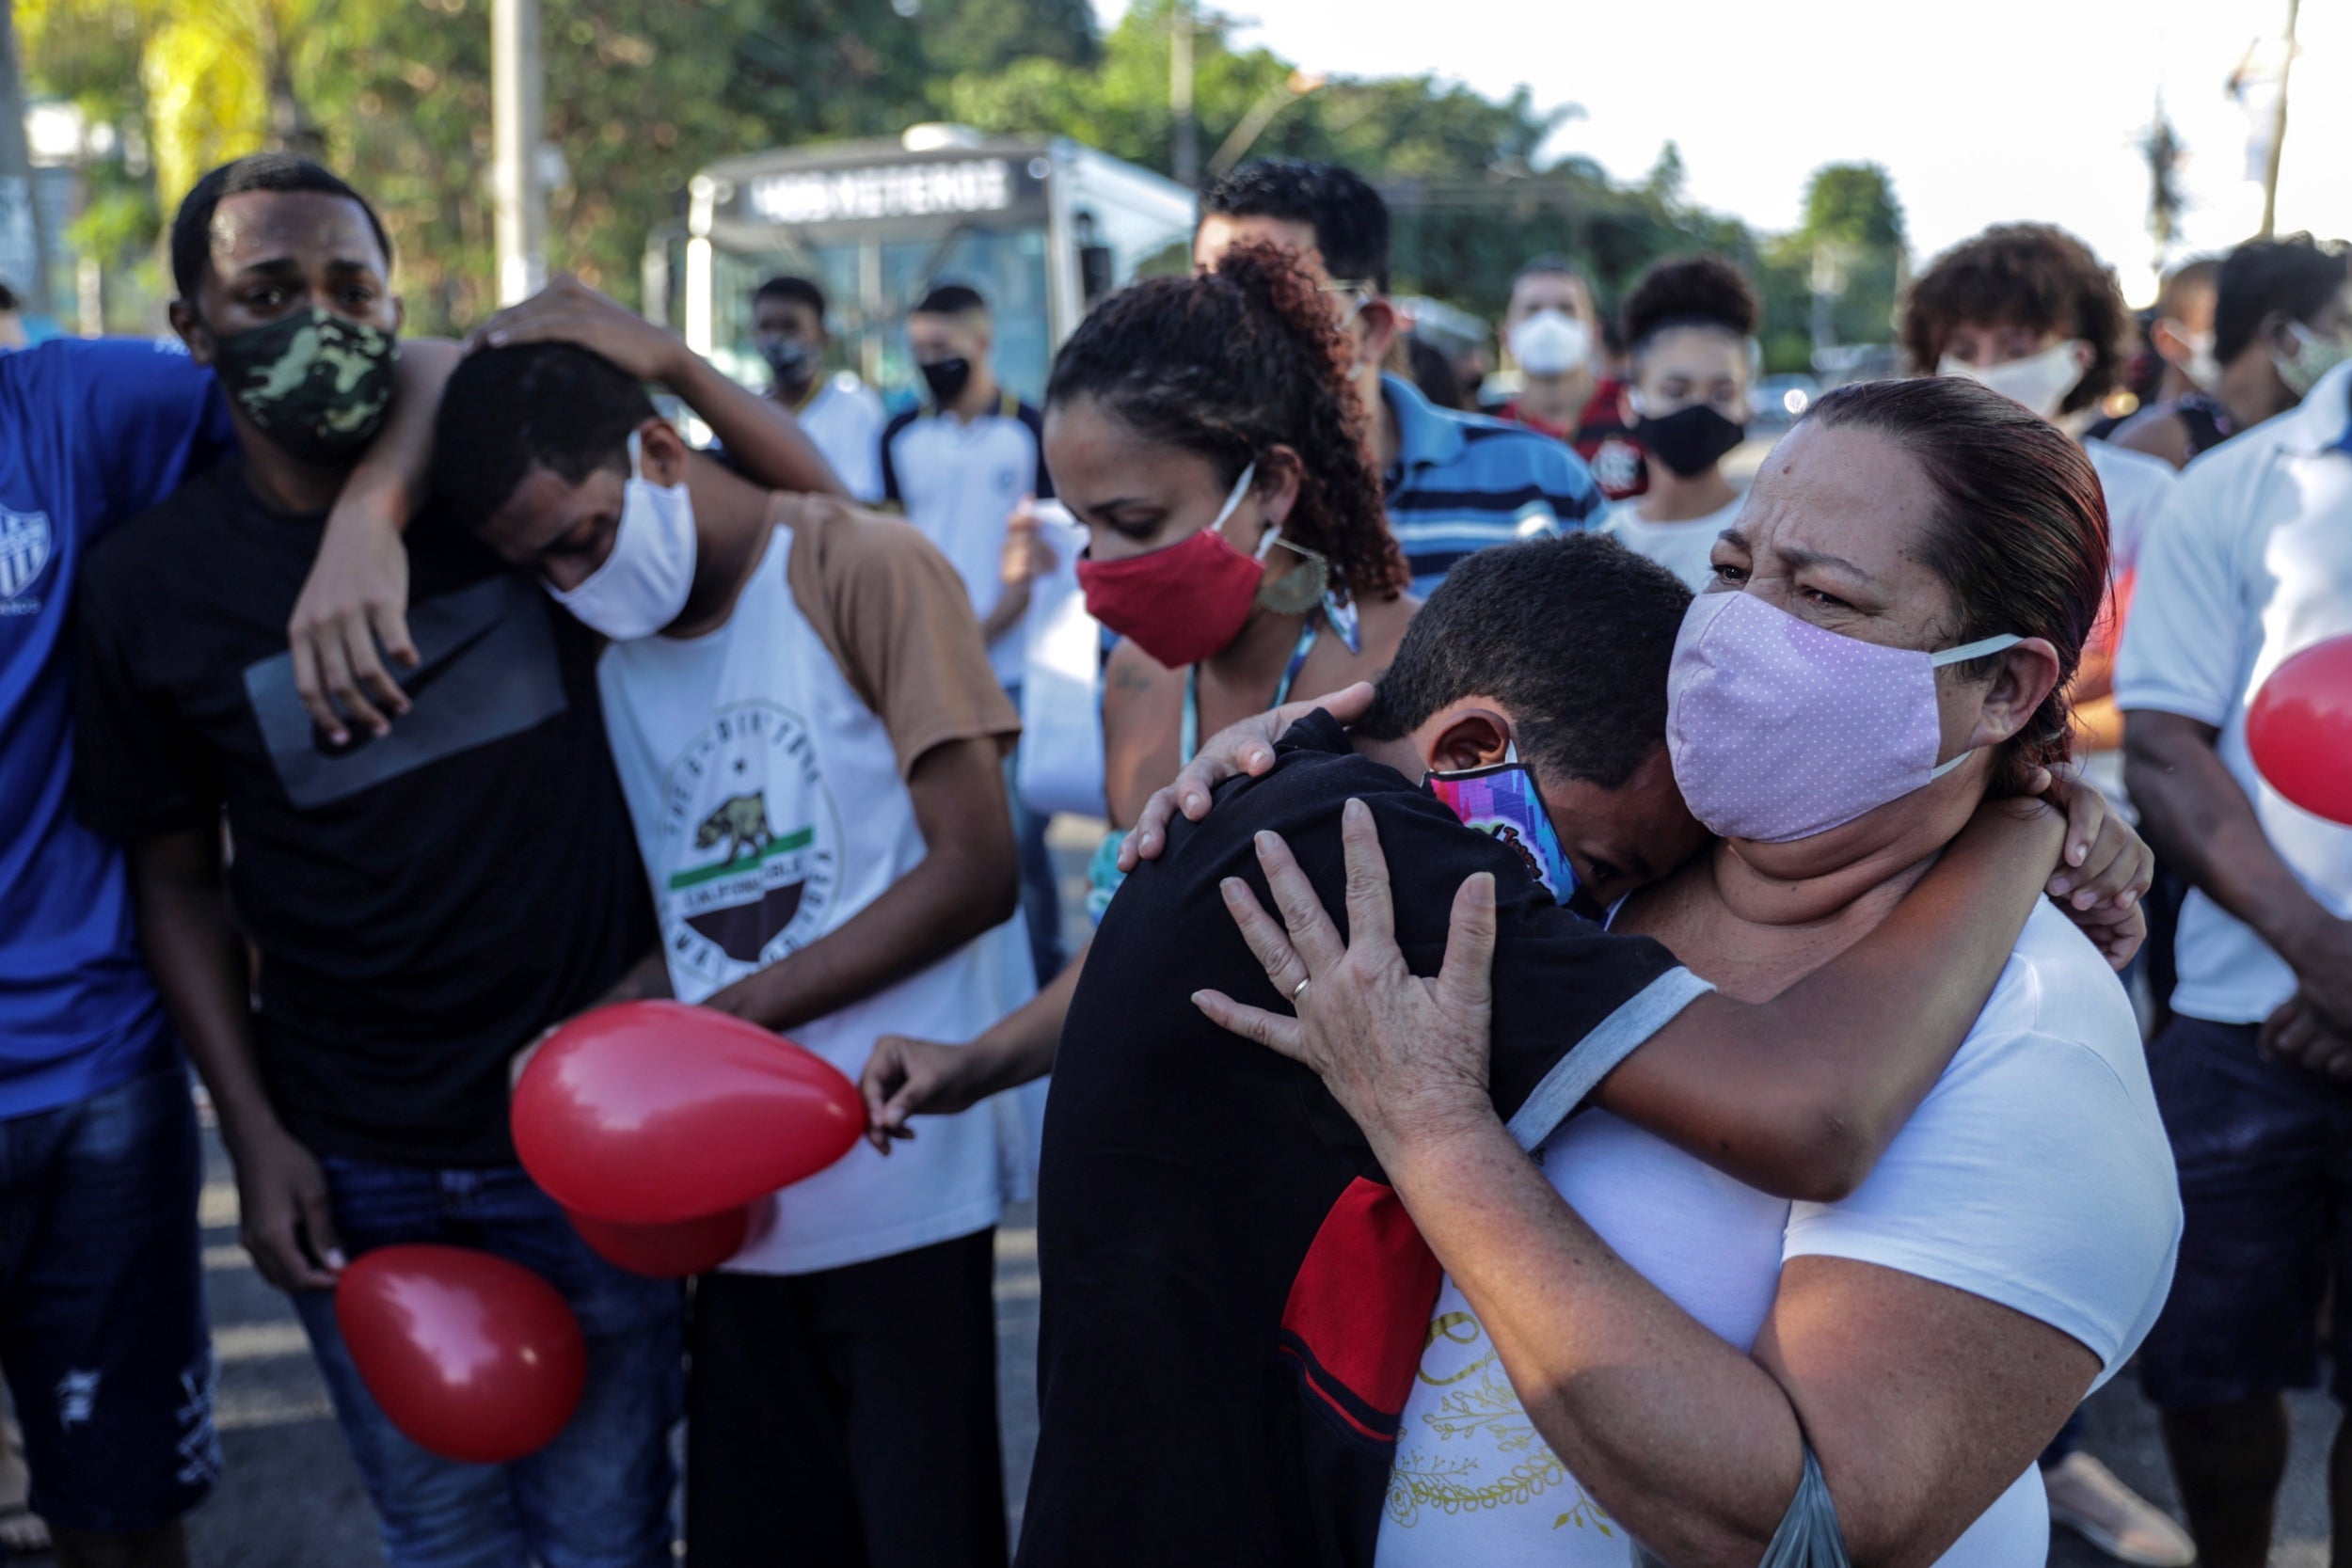 Friends and family mourn the death of Joao Pedro Matos Pinto, who was killed by police